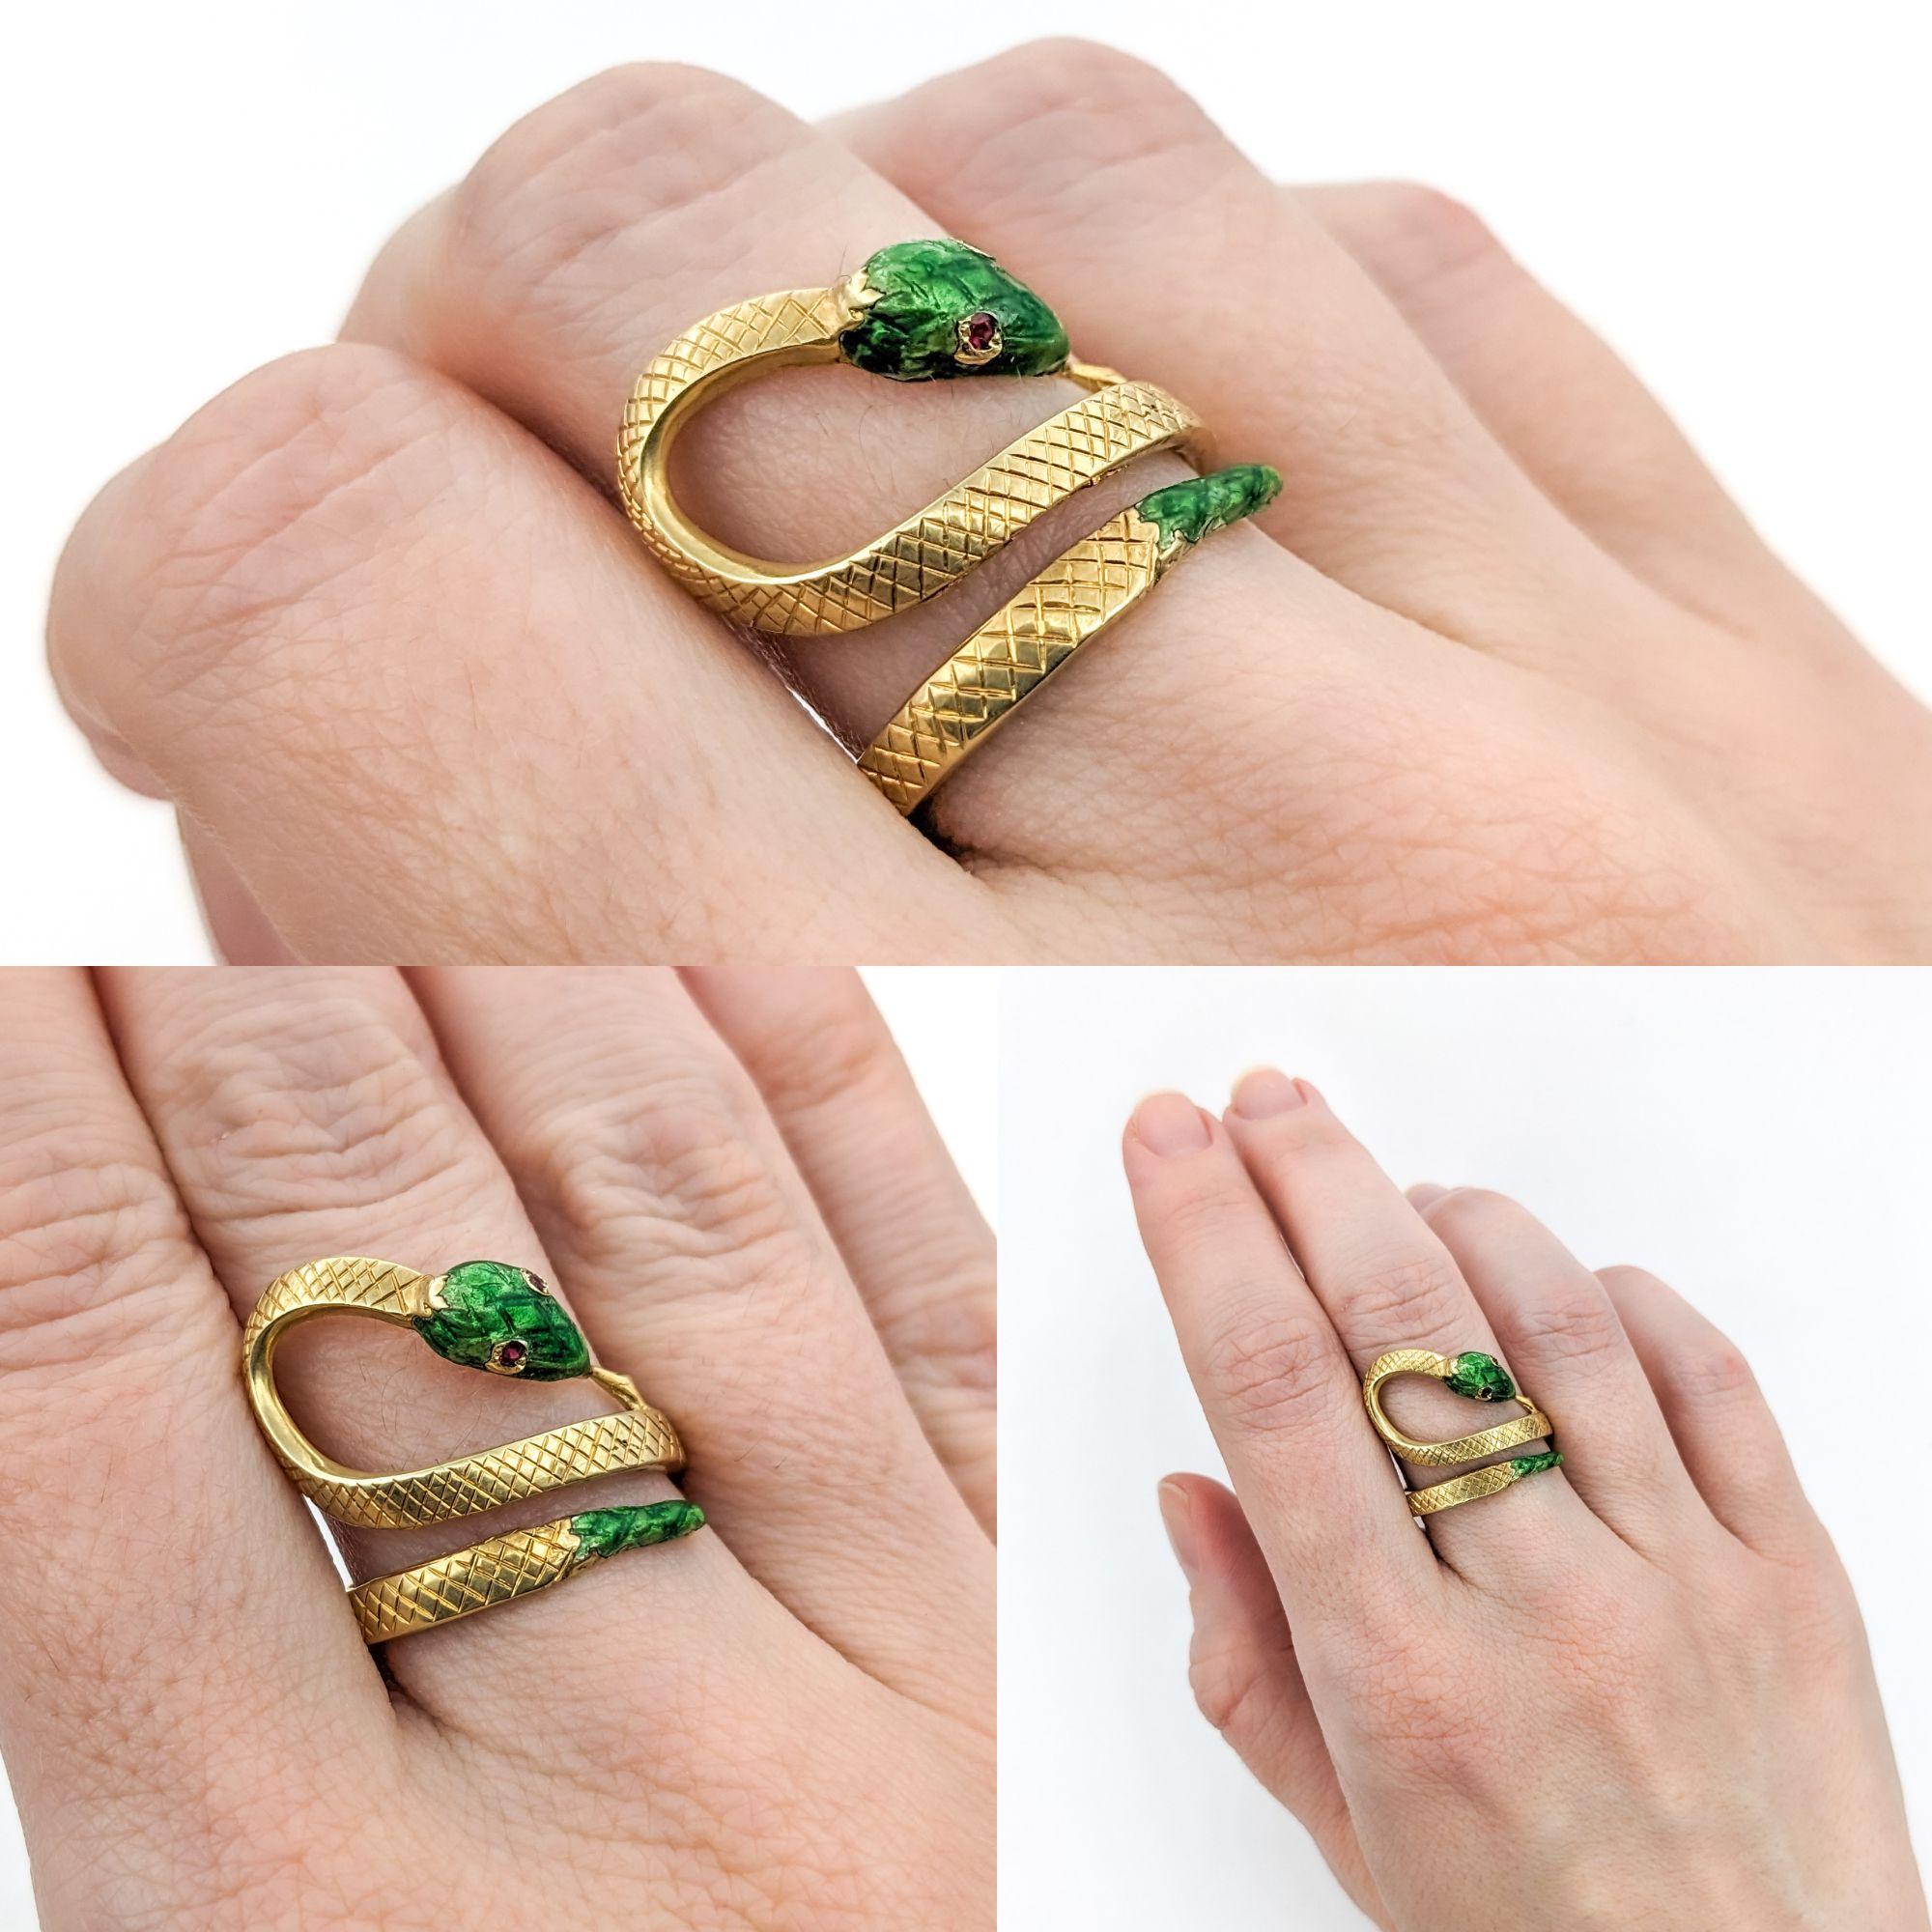 Vintage Green Enamel Snake Ring with Ruby Eyes In Yellow Gold

Introducing this playful Mid-Century era Snake Ring, exquisitely crafted in 14k yellow gold. The Snake features .02ctw of round rubies for eyes, adding a touch of color and personality. 